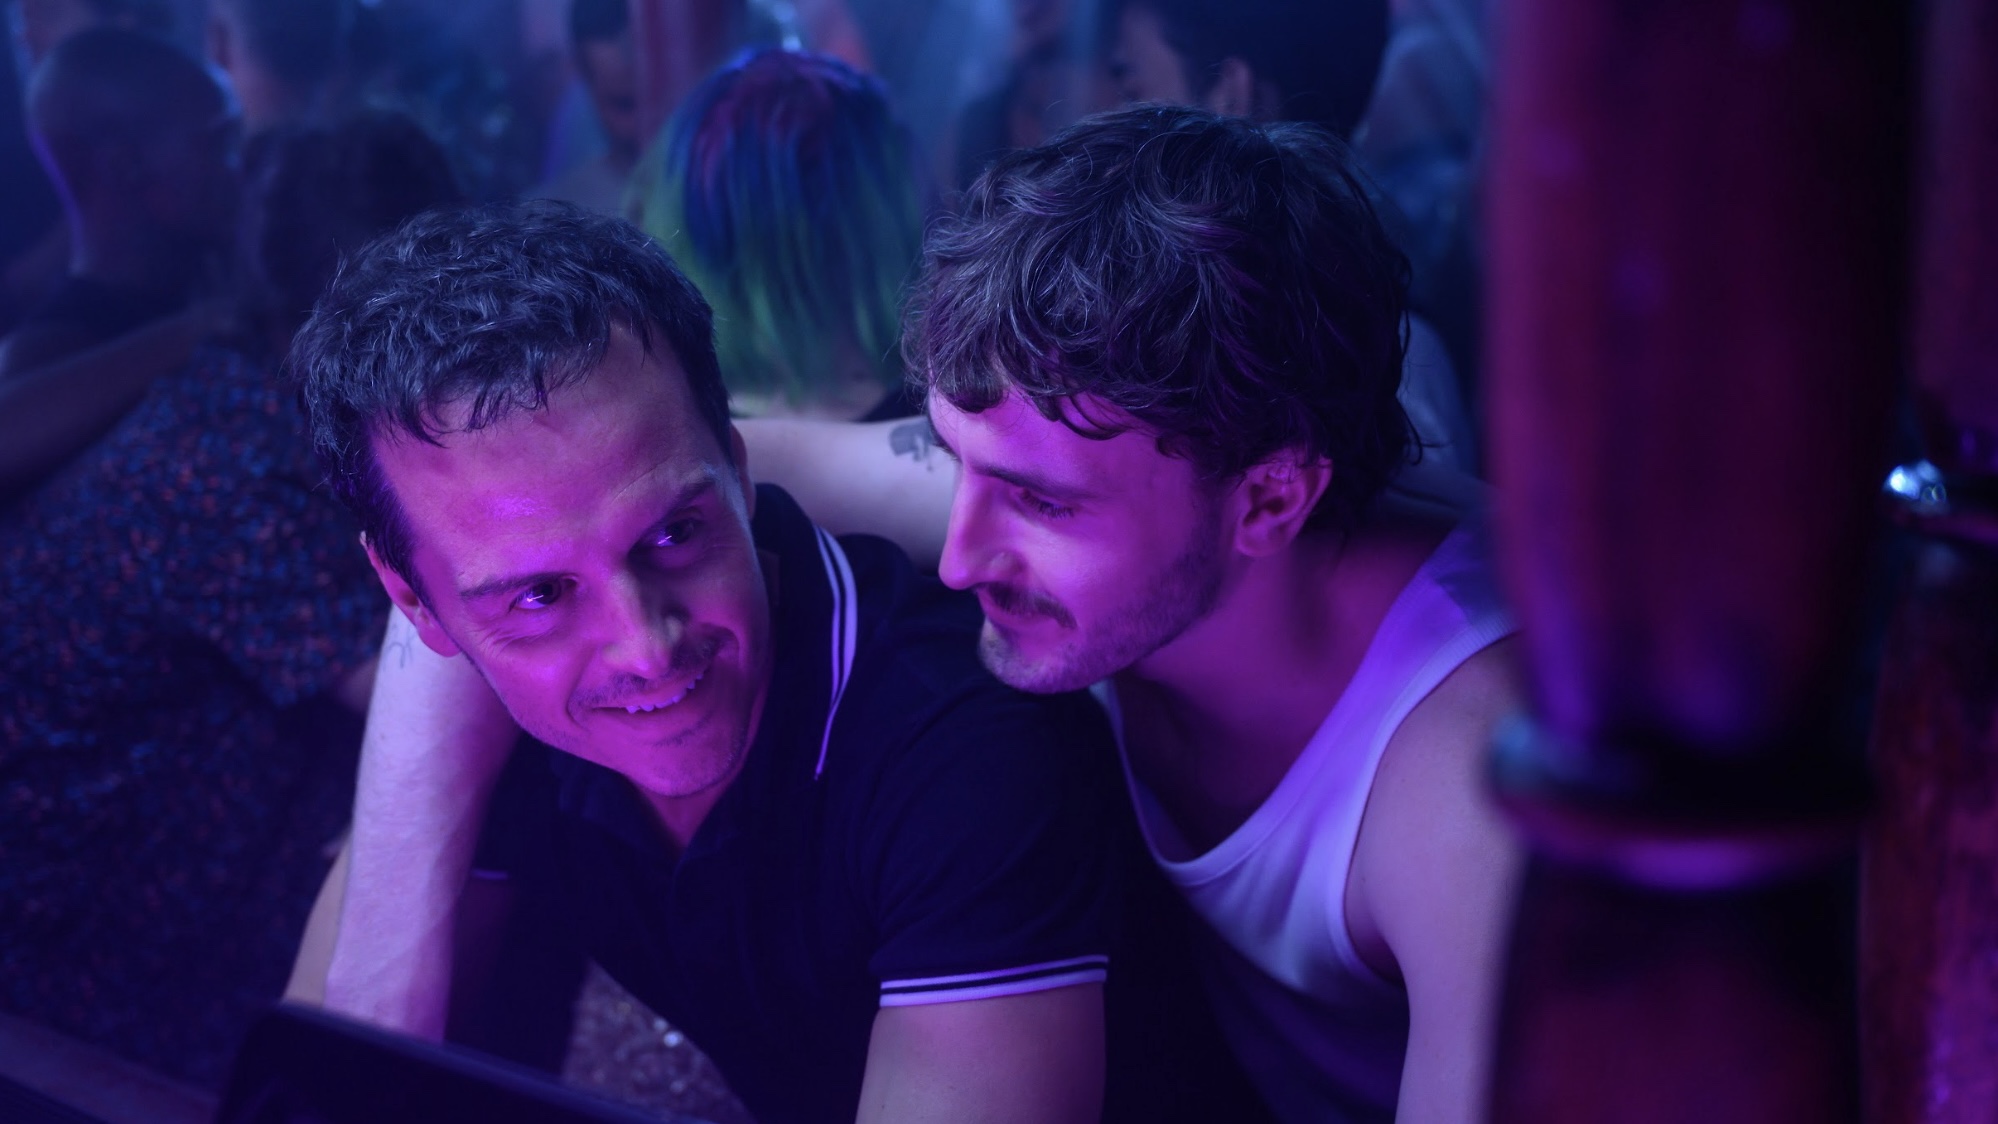 Paul Mescal with his arm over Andrew Scott in a club.